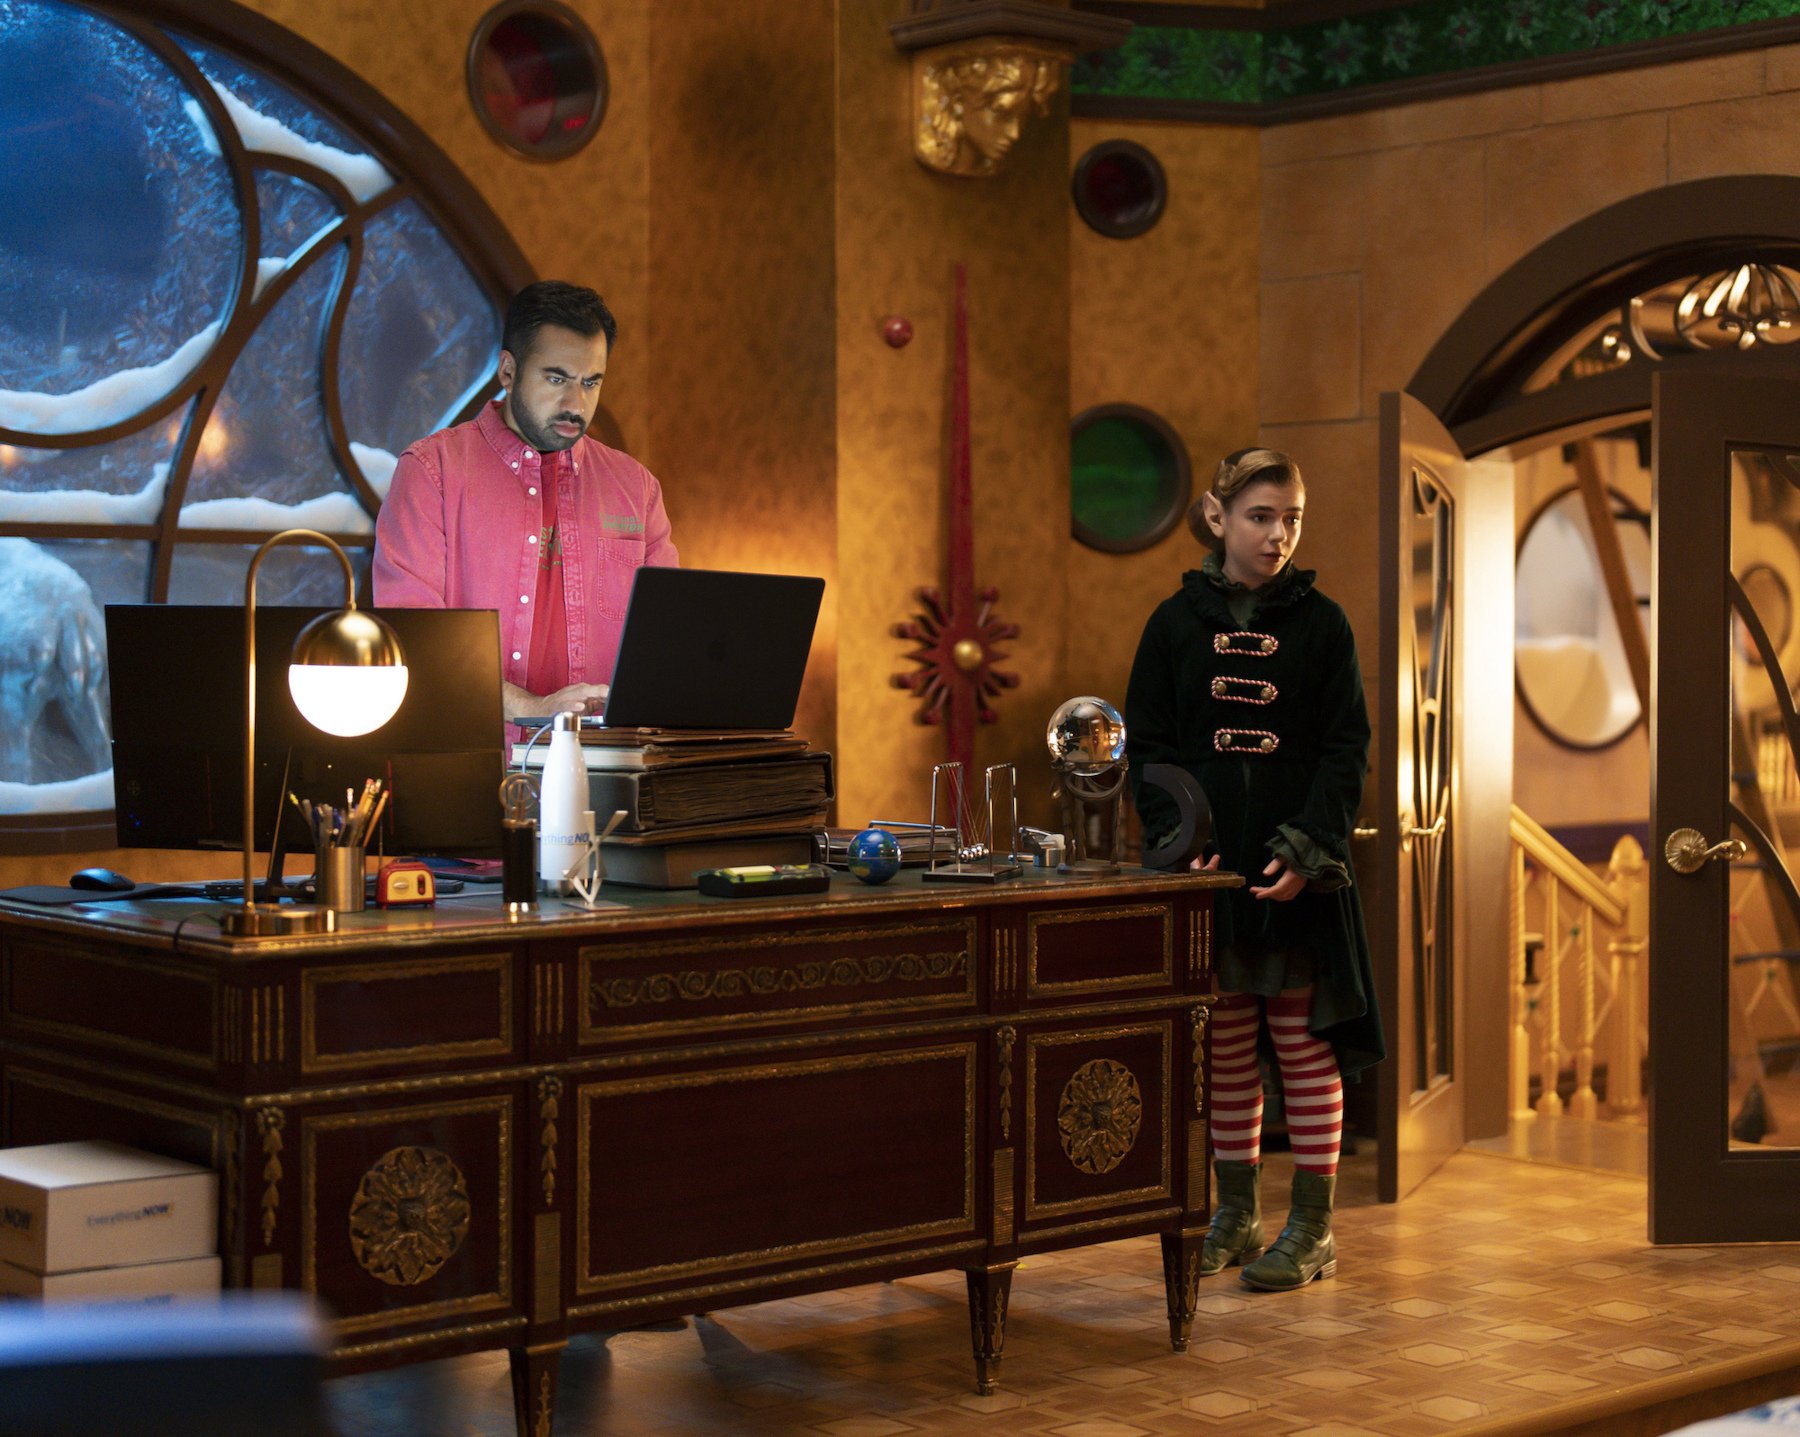 Kal Penn and Matilda Lawler as Simon Choksy and Betty in 'The Santa Clauses' for our article about episode 5. Simon is standing at his desk, looking at a computer. Betty is standing next to it,